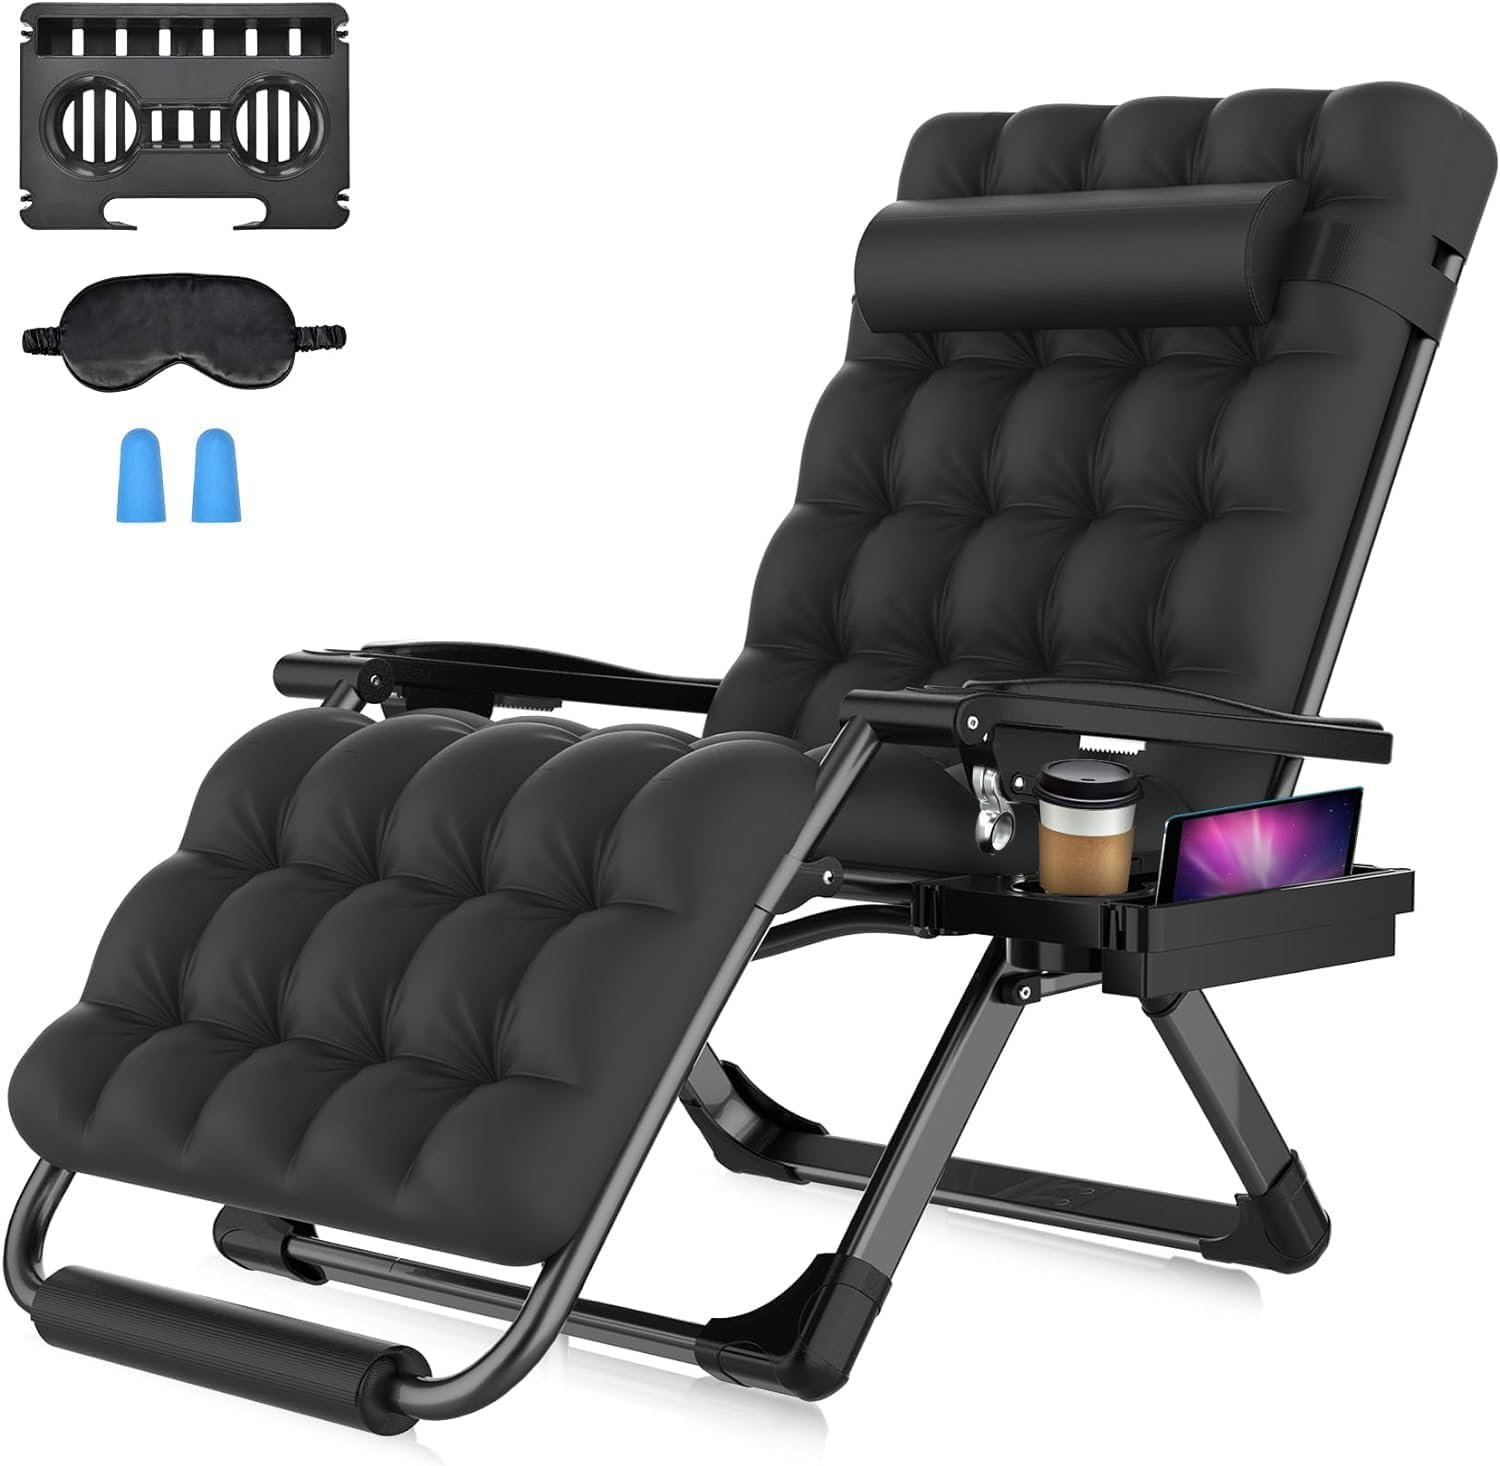 33In XXL Lounge Chair Review